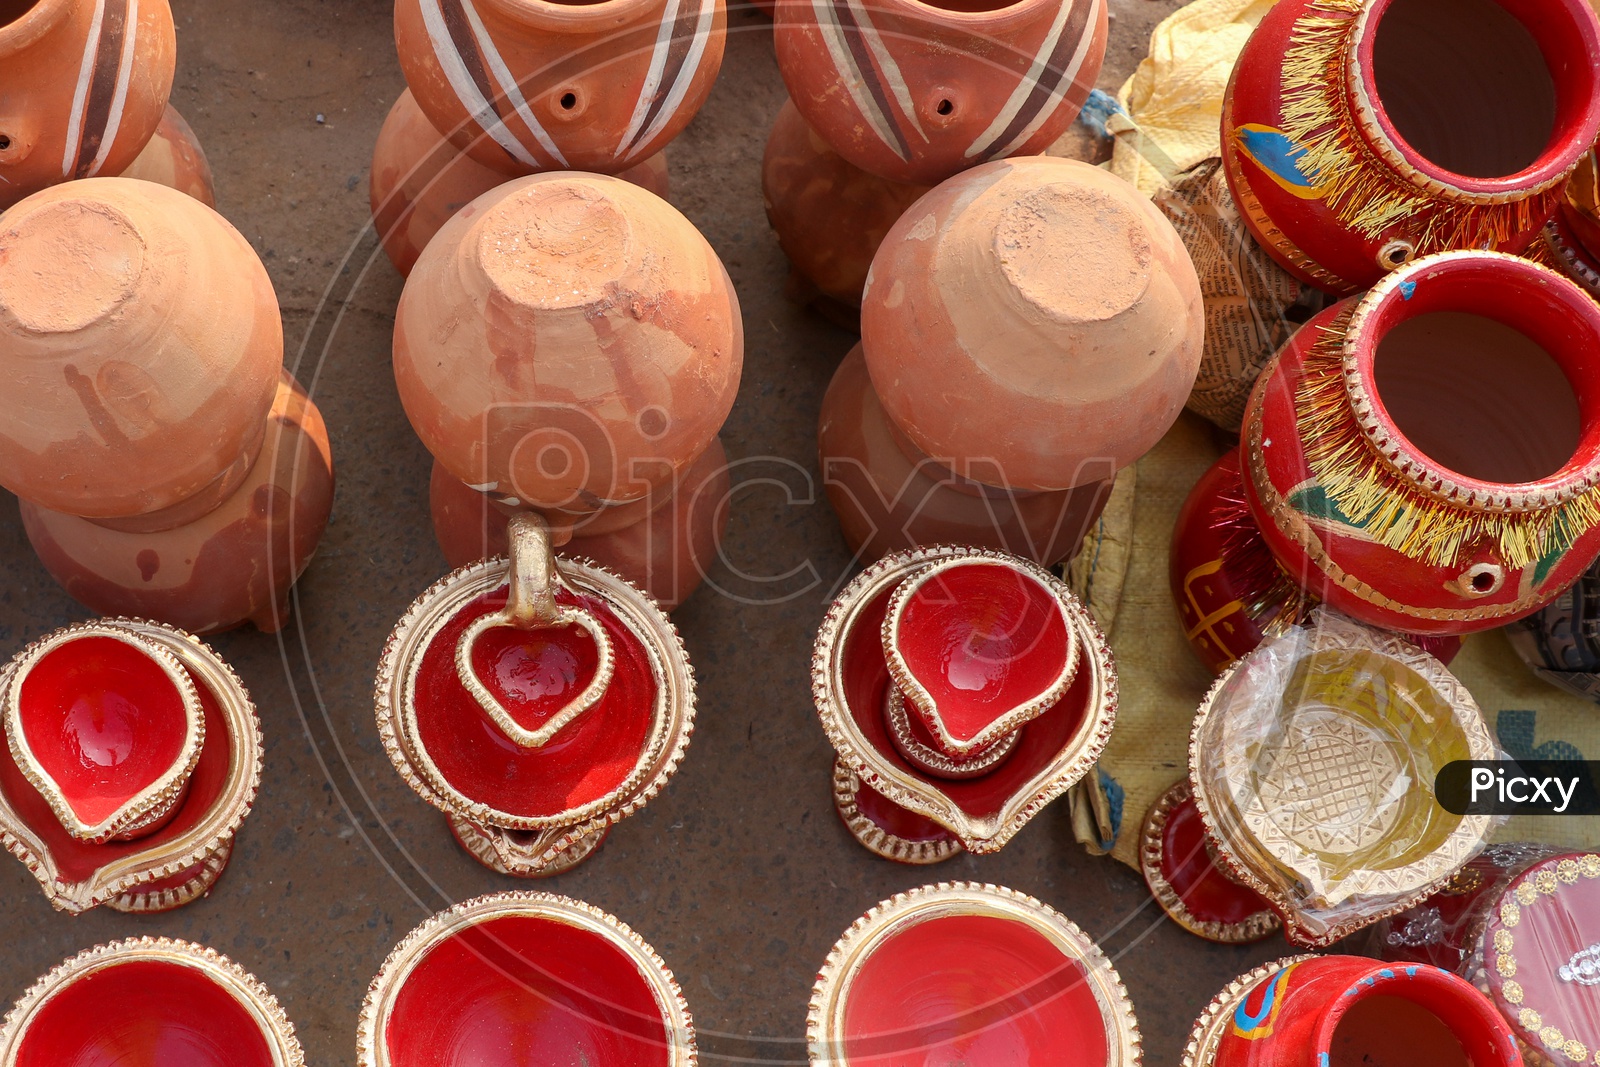 Clay Diwali Dias Selling On a Road Side Vendor Stall